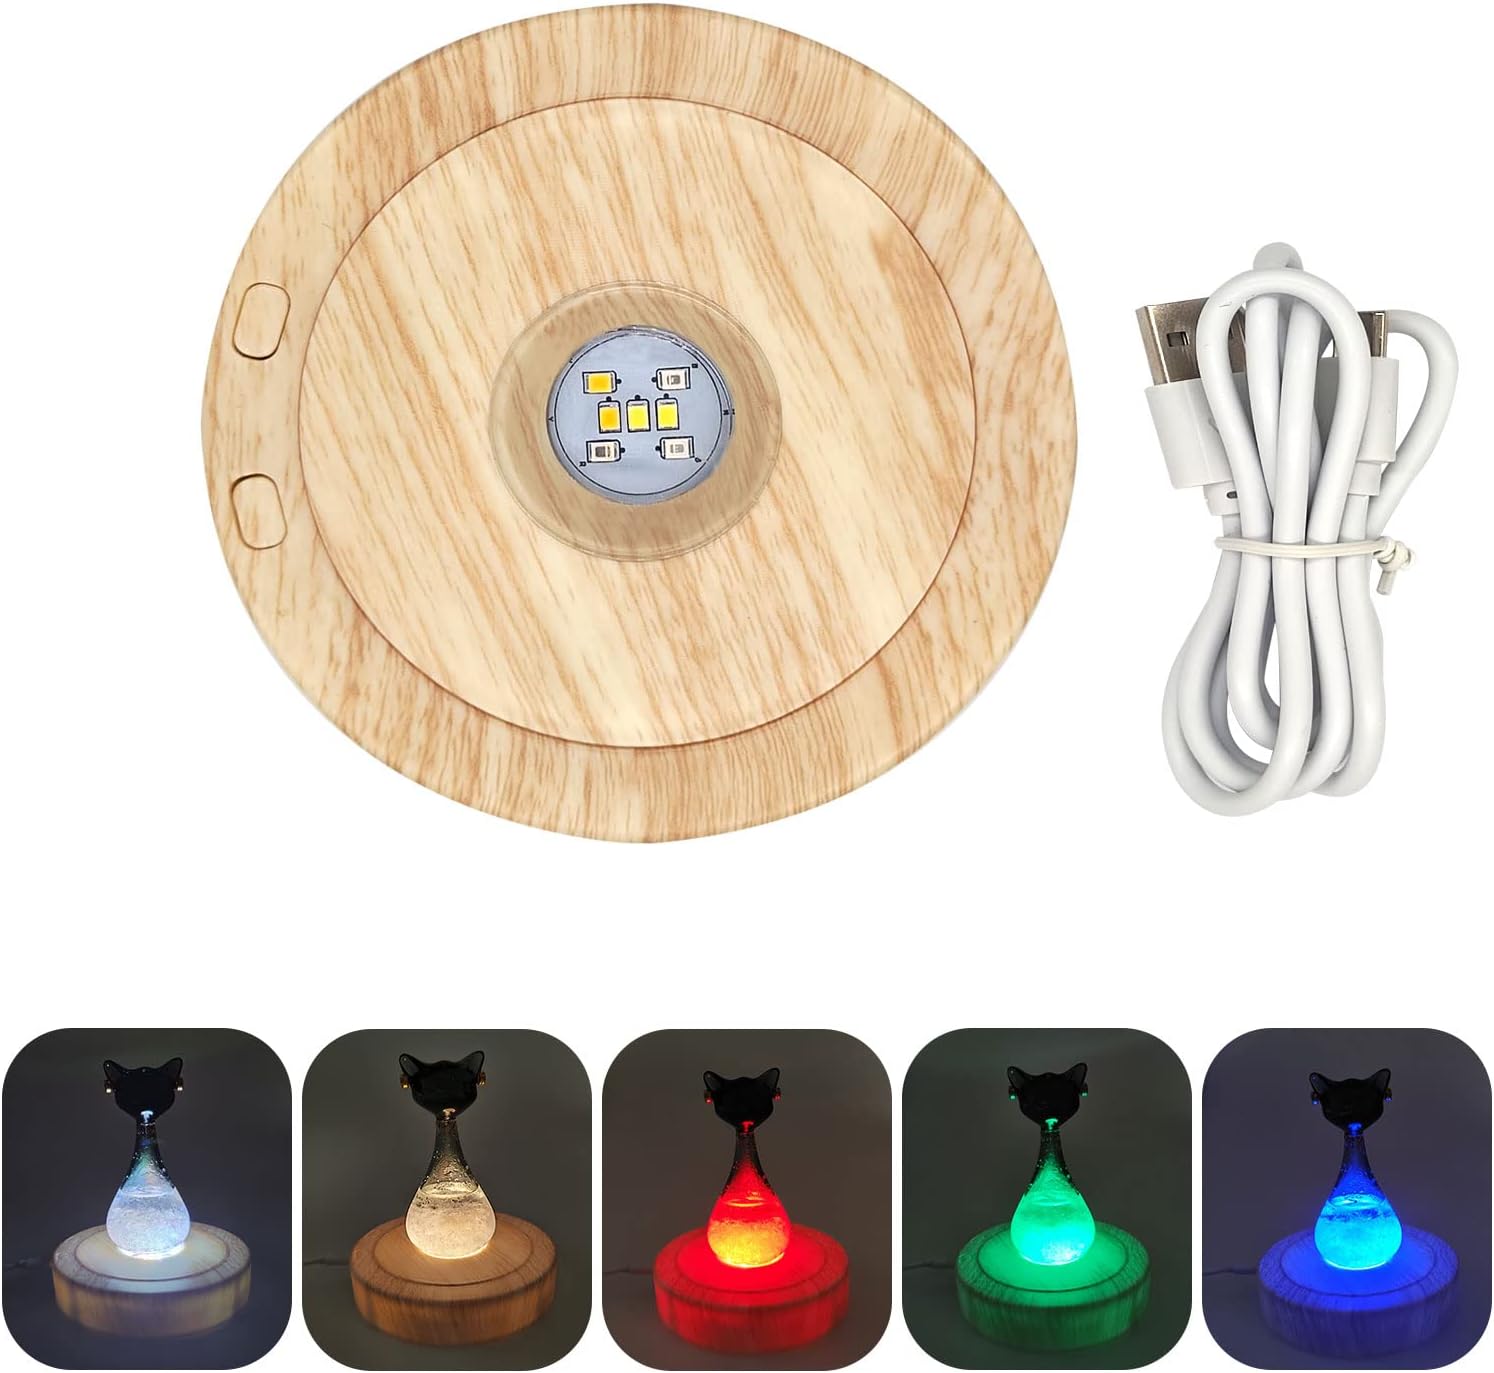 Rotating Display Stand With Led Light Colorful Spinning Base